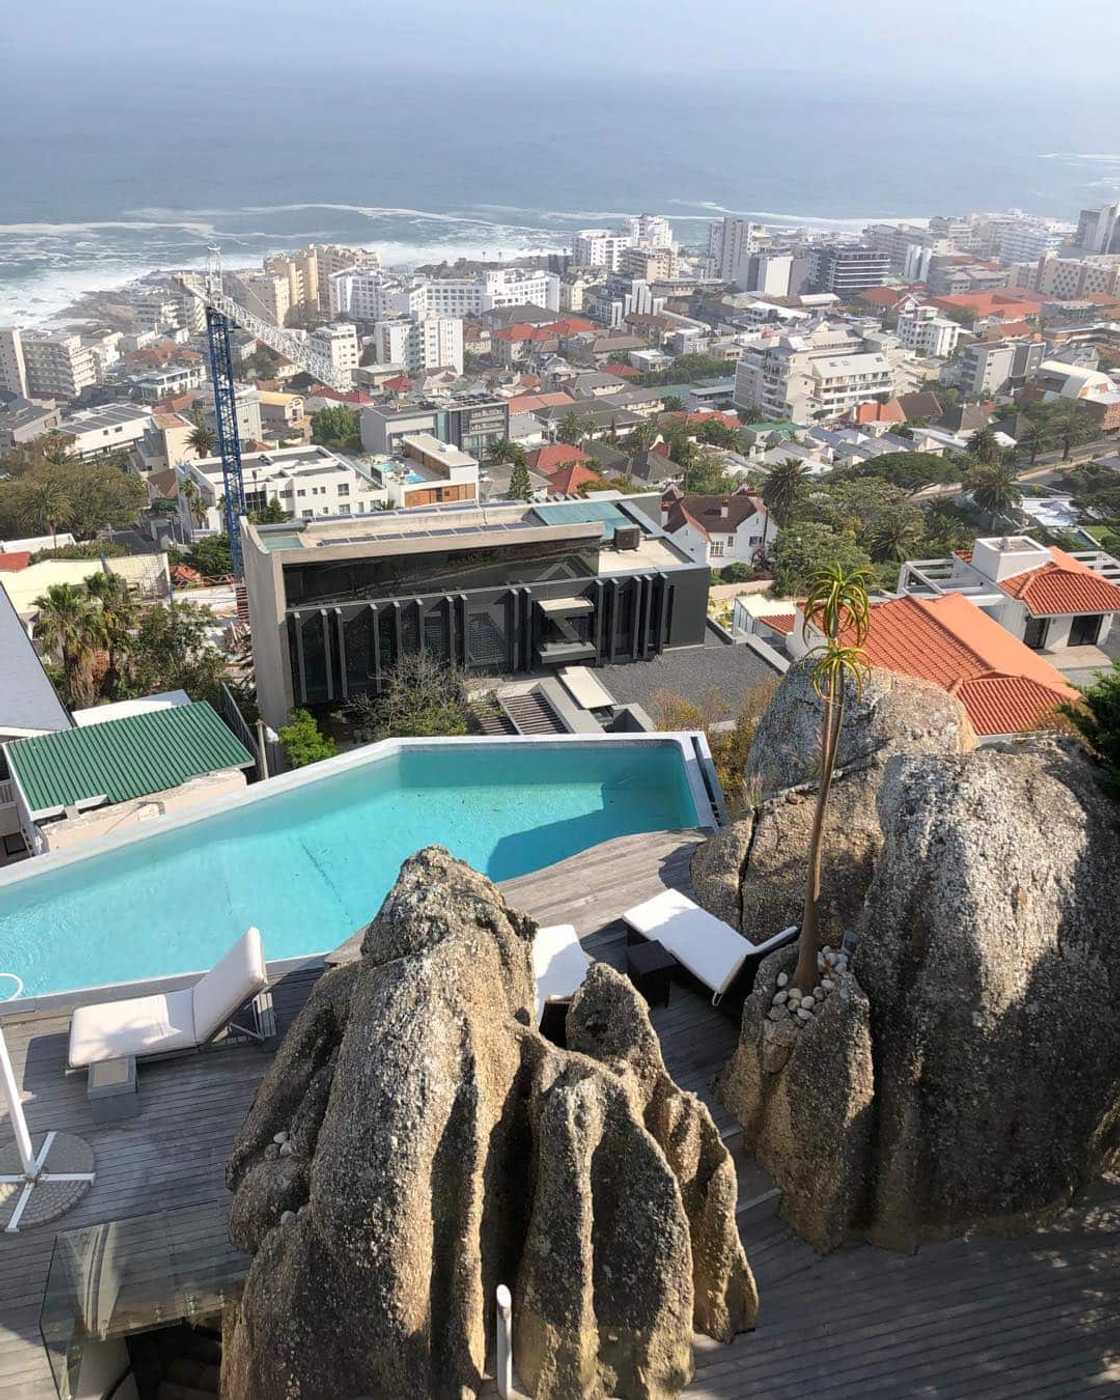 Wealthiest suburbs in South Africa